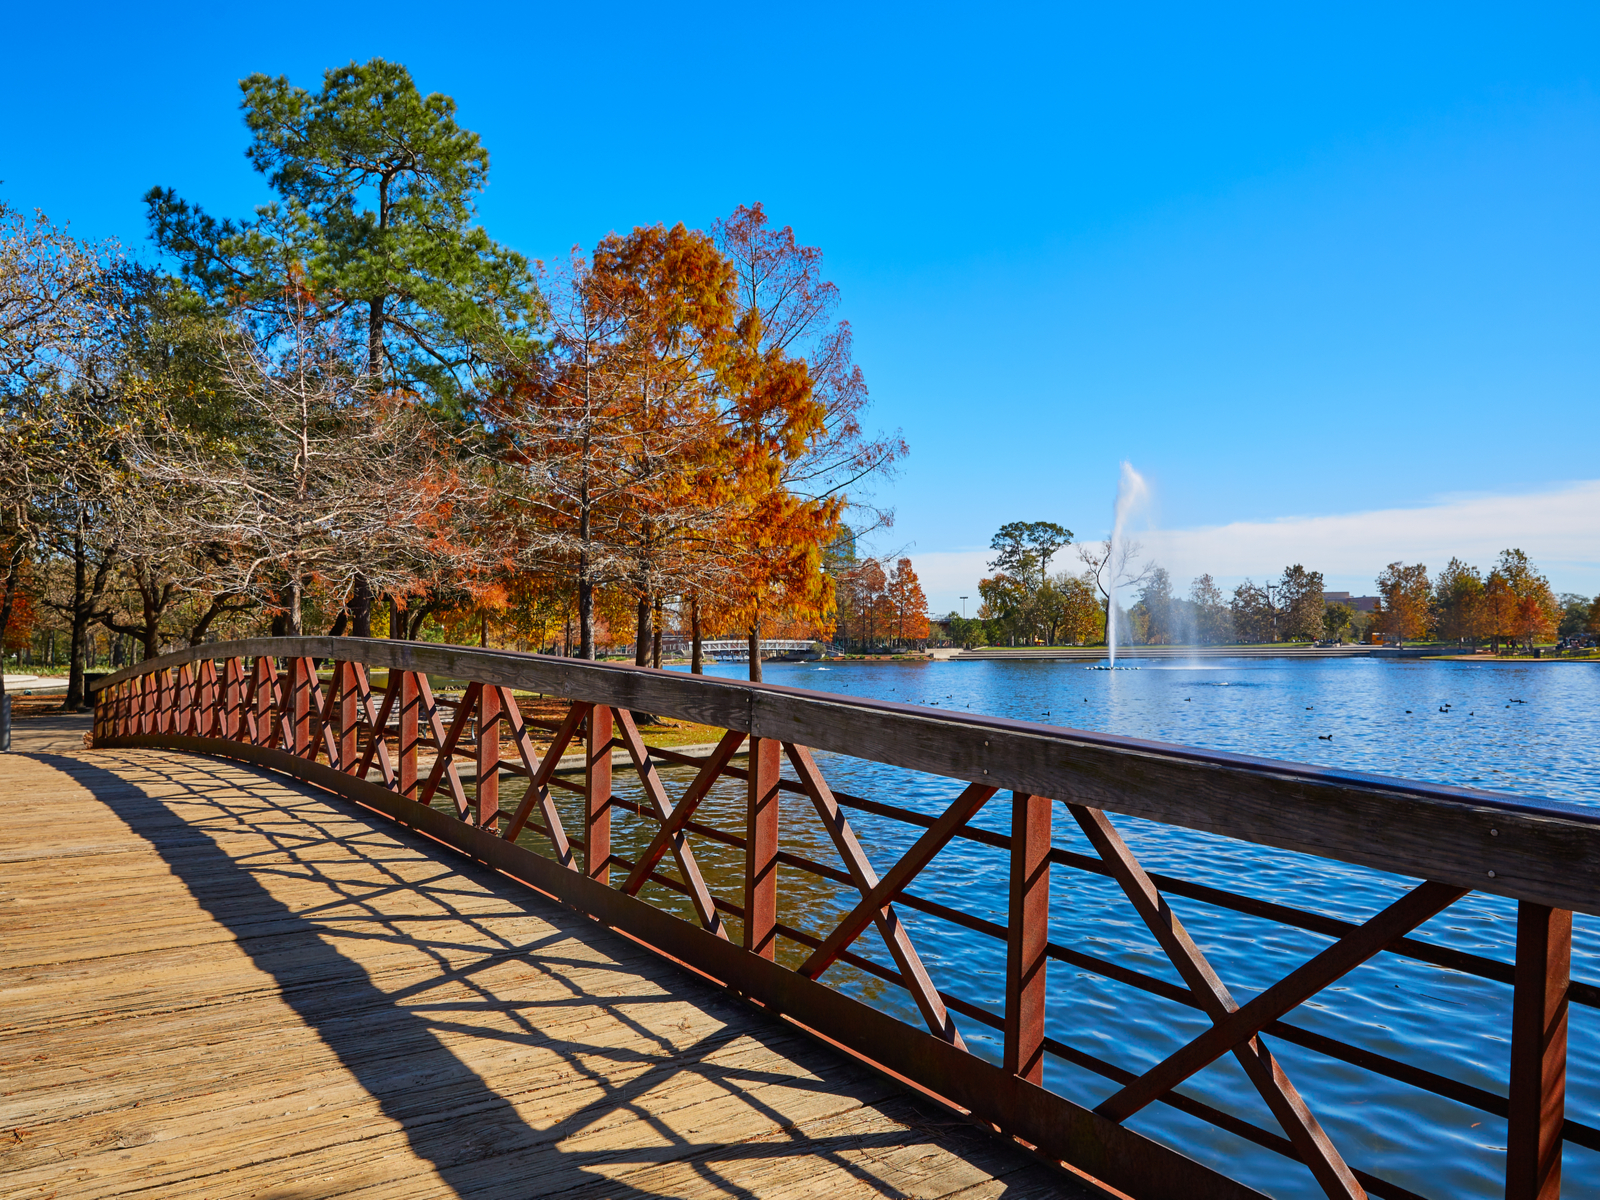 Houston Hermann Park, one of the best things to do in Texas